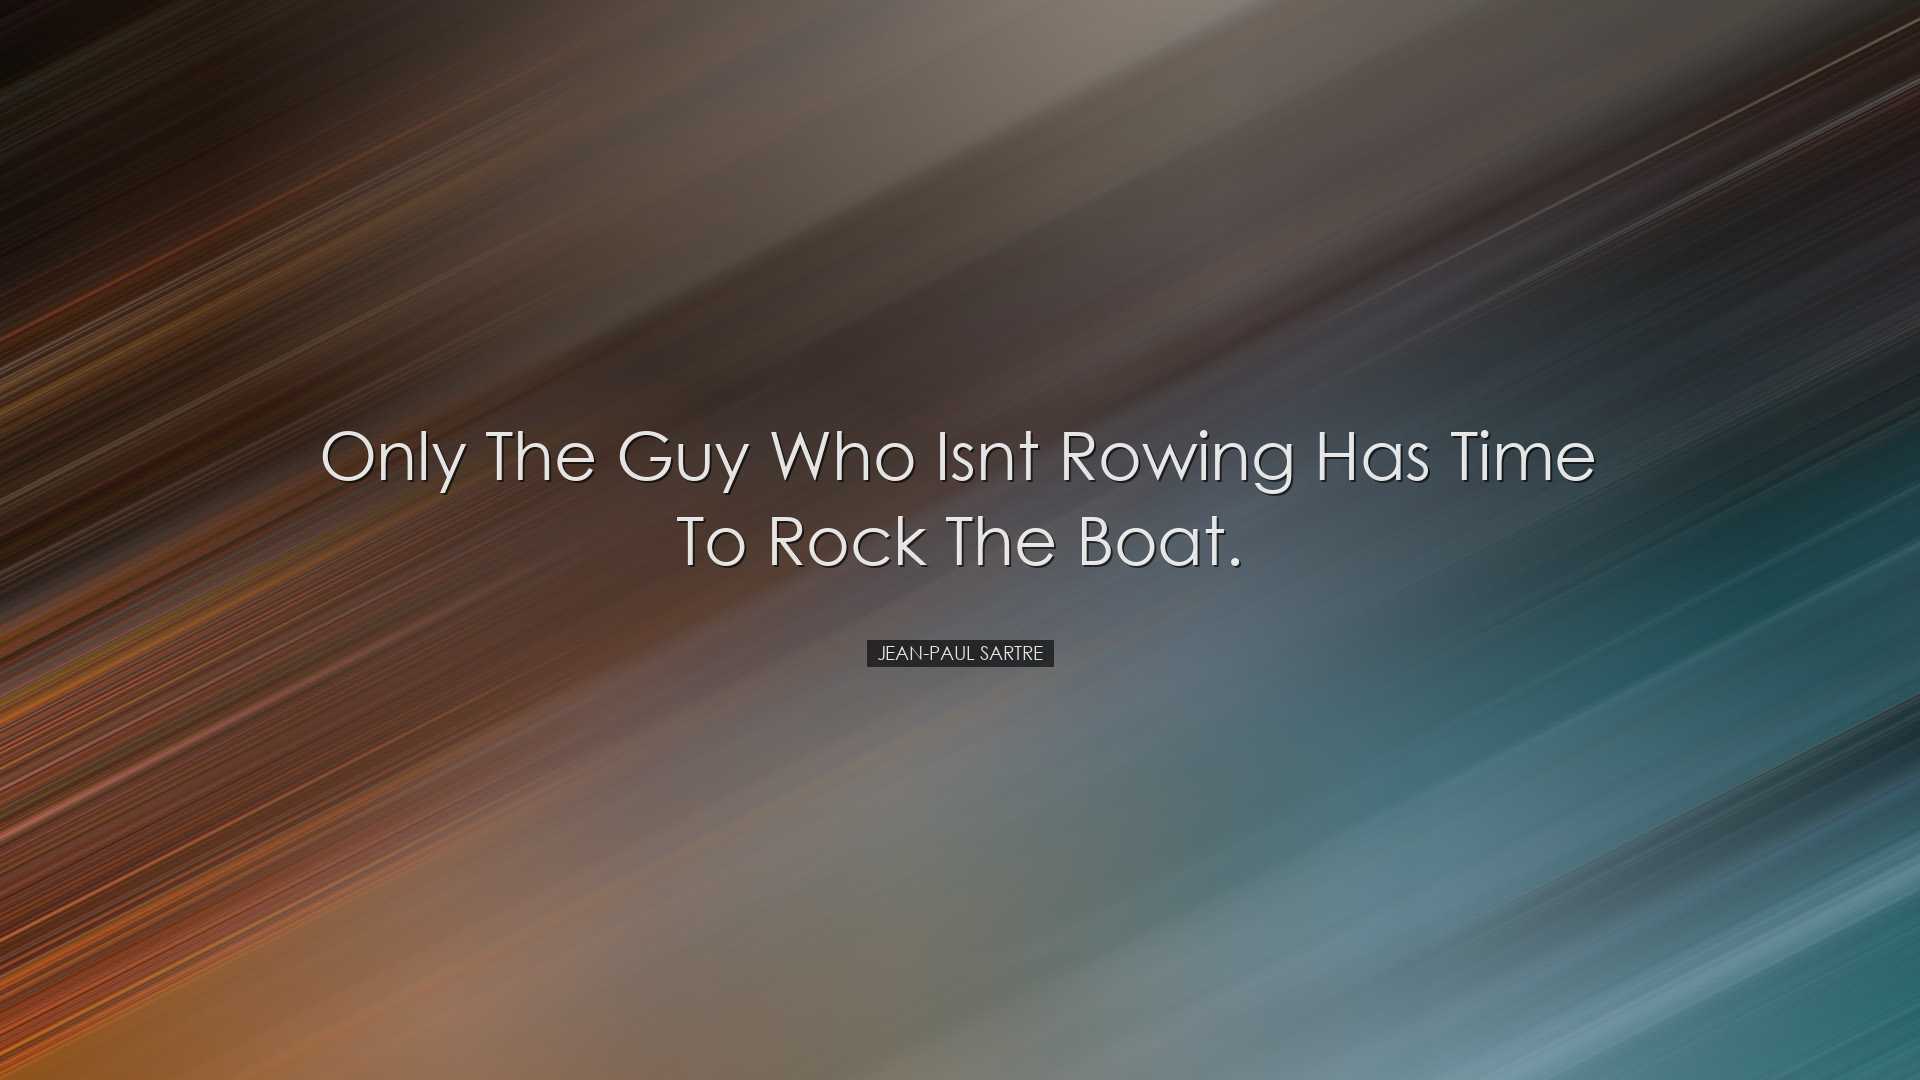 Only the guy who isnt rowing has time to rock the boat. - Jean-Pau